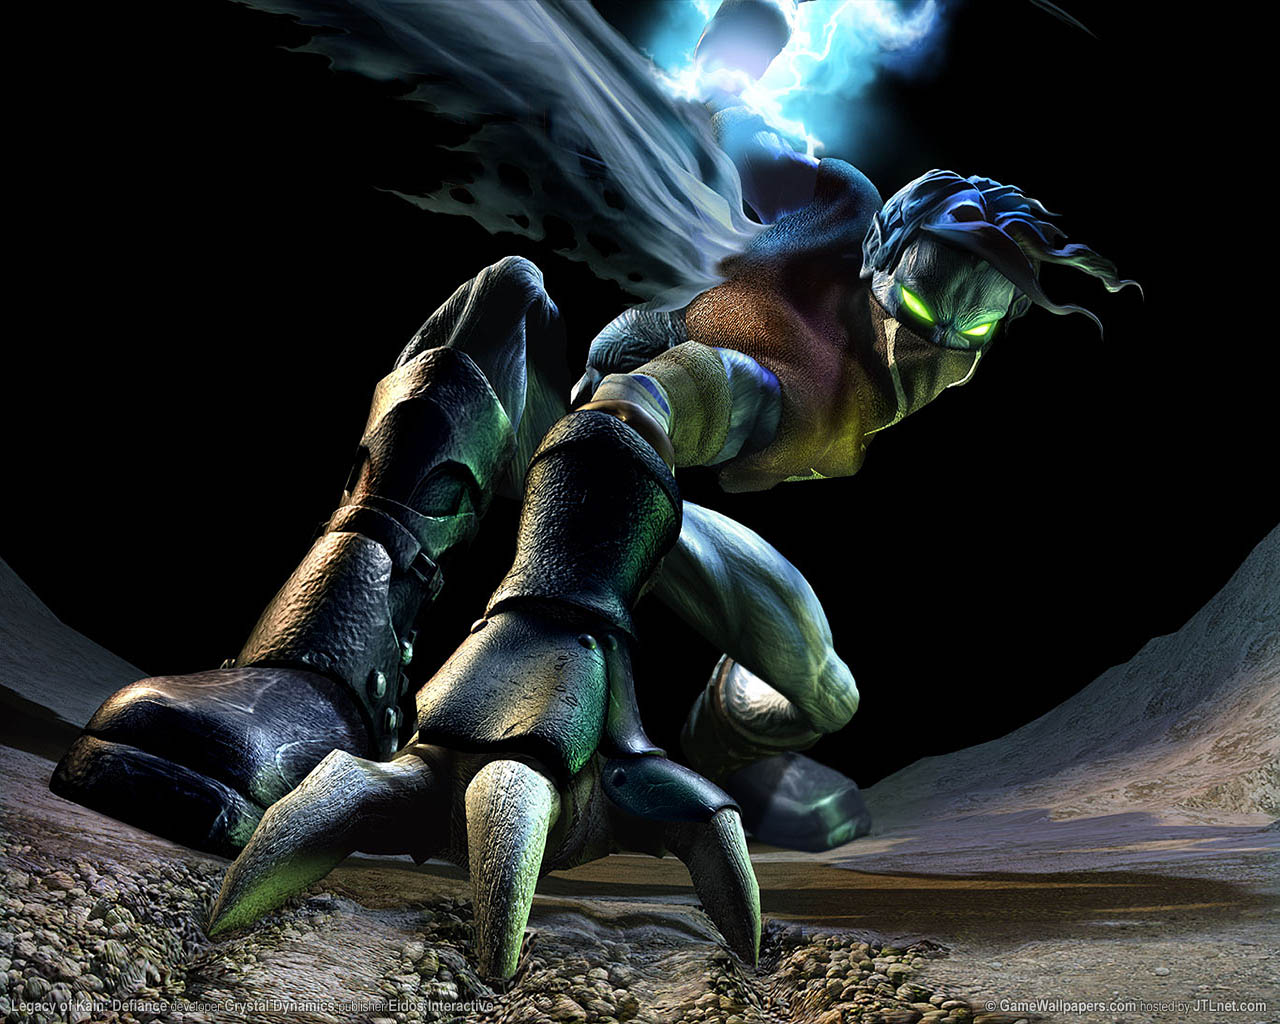 Legacy of Kain%25253A Defiance wallpaper 03 1280x1024